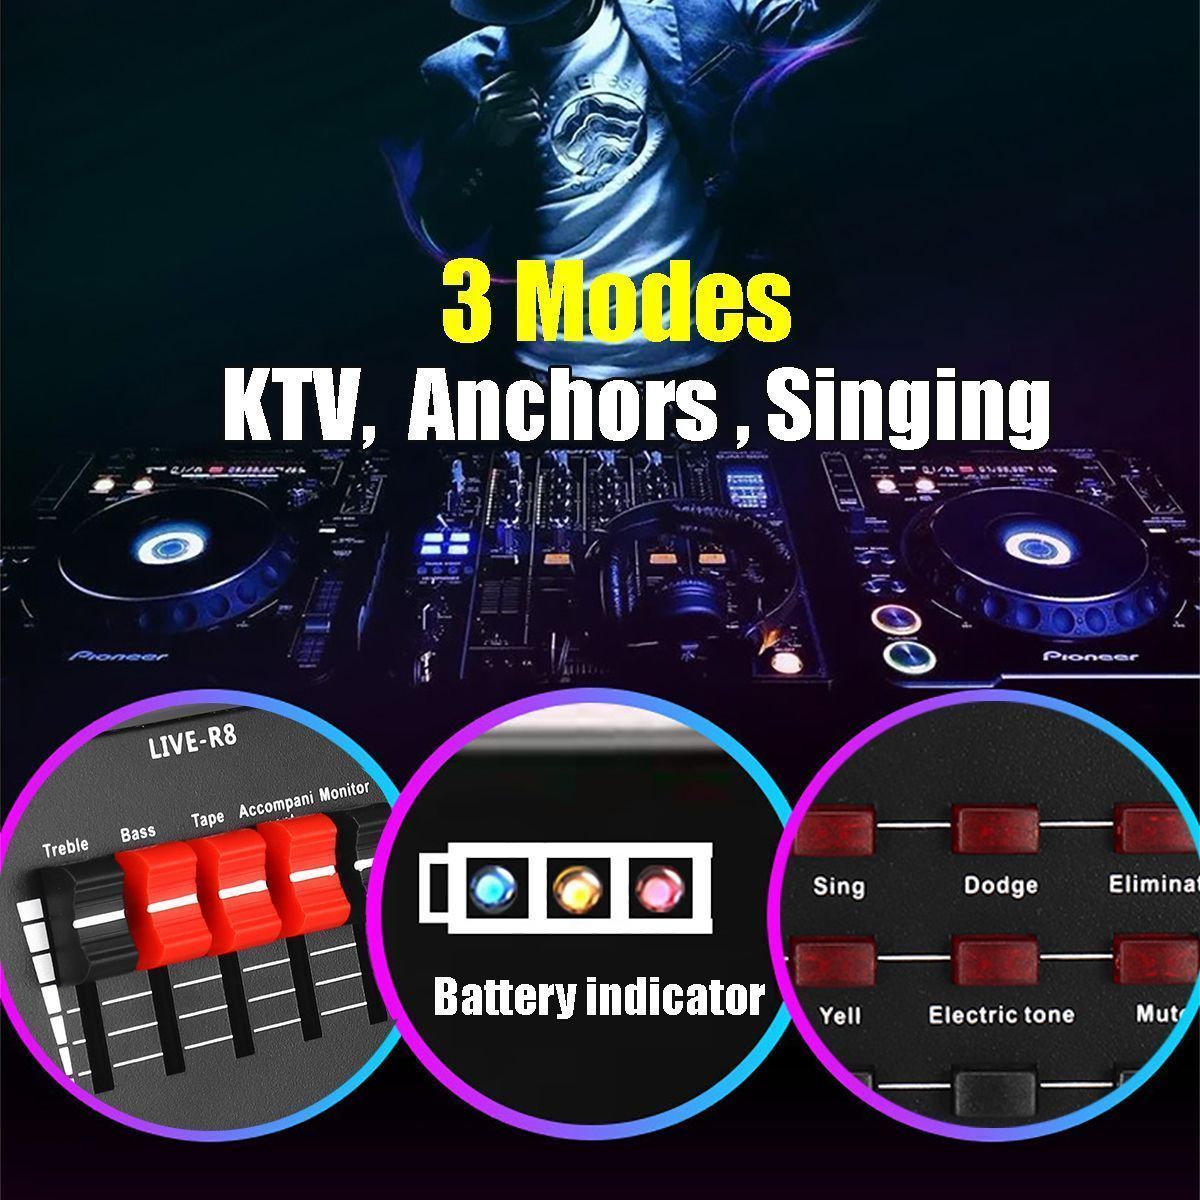 LIVE-R8-15-Sound-Effects-Bluetooth-Live-Sound-Card-Audio-Mixers-Webcast-Headset-Mic-Voice-Control-fo-1718612